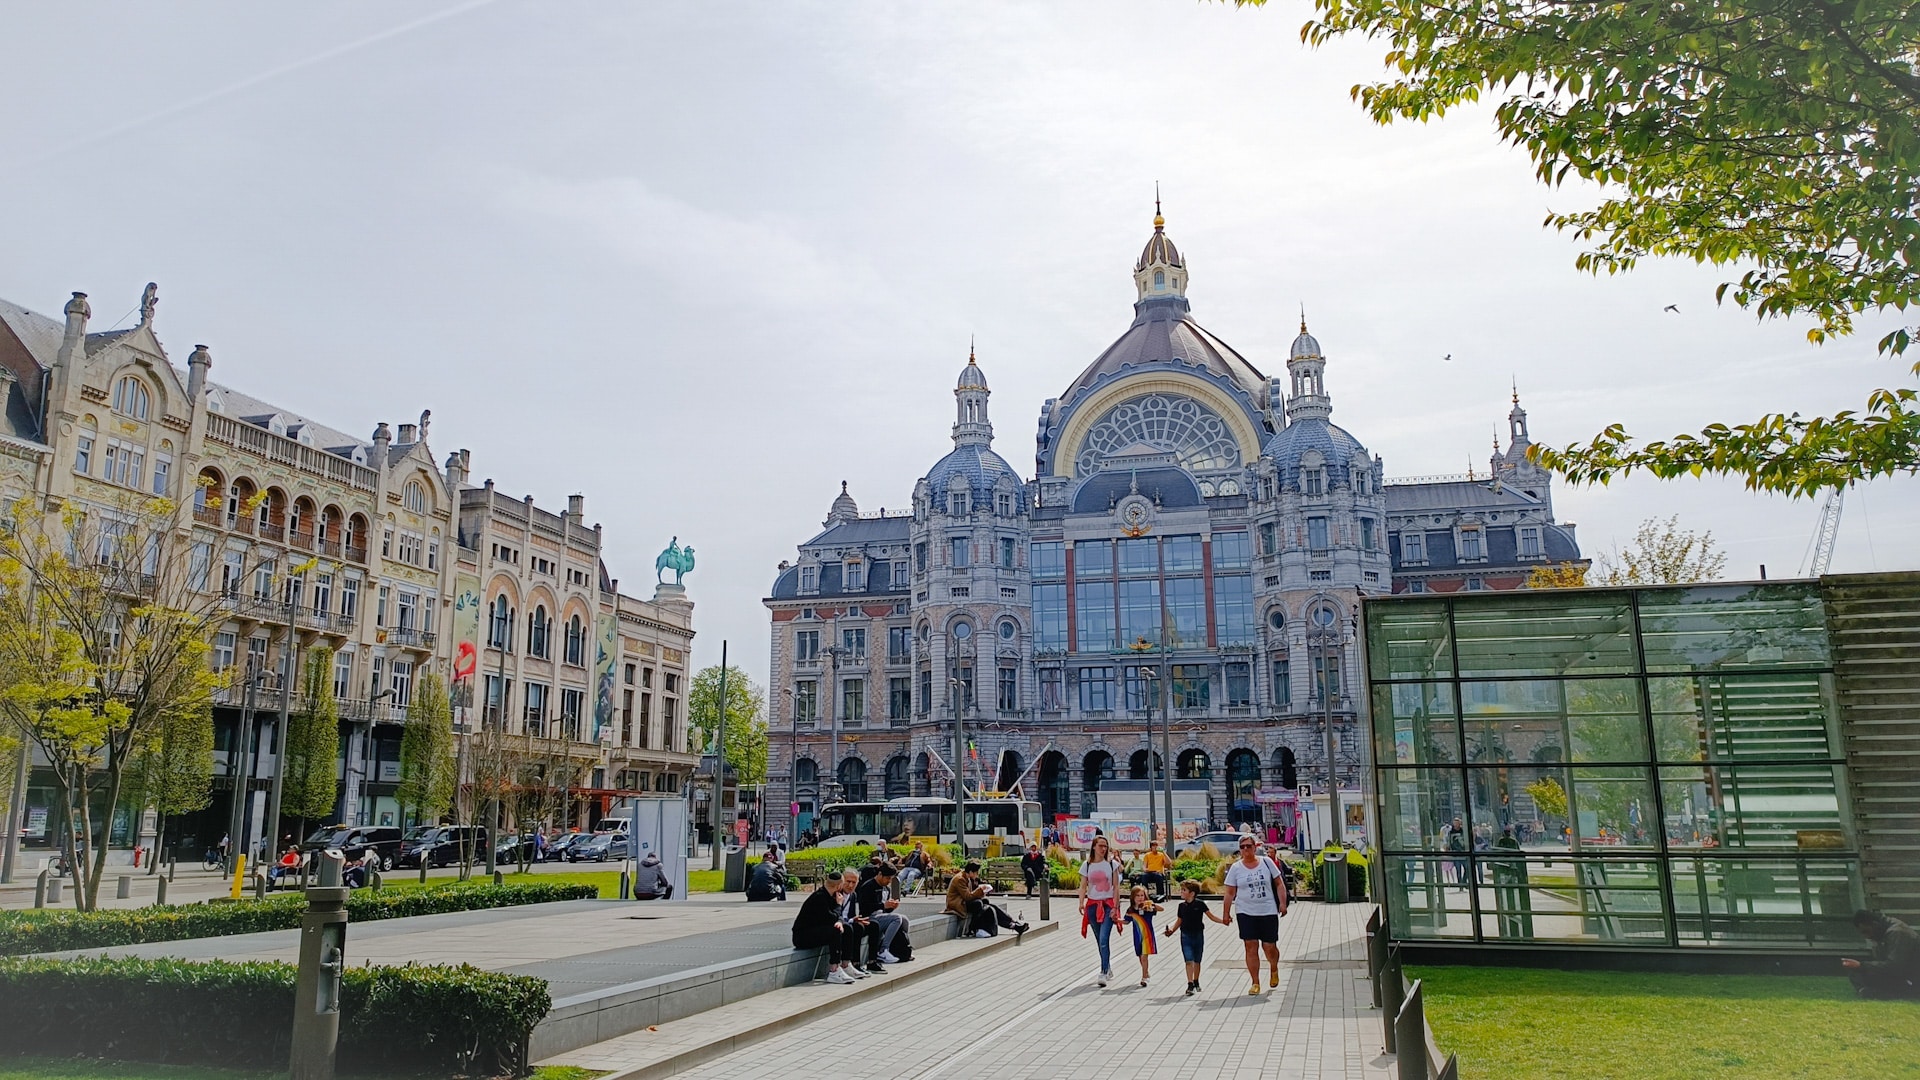 Antwerpen Centraal Station is one of the busiest railway hubs in the country and a very convenient location to stay in Antwerp, Belgium